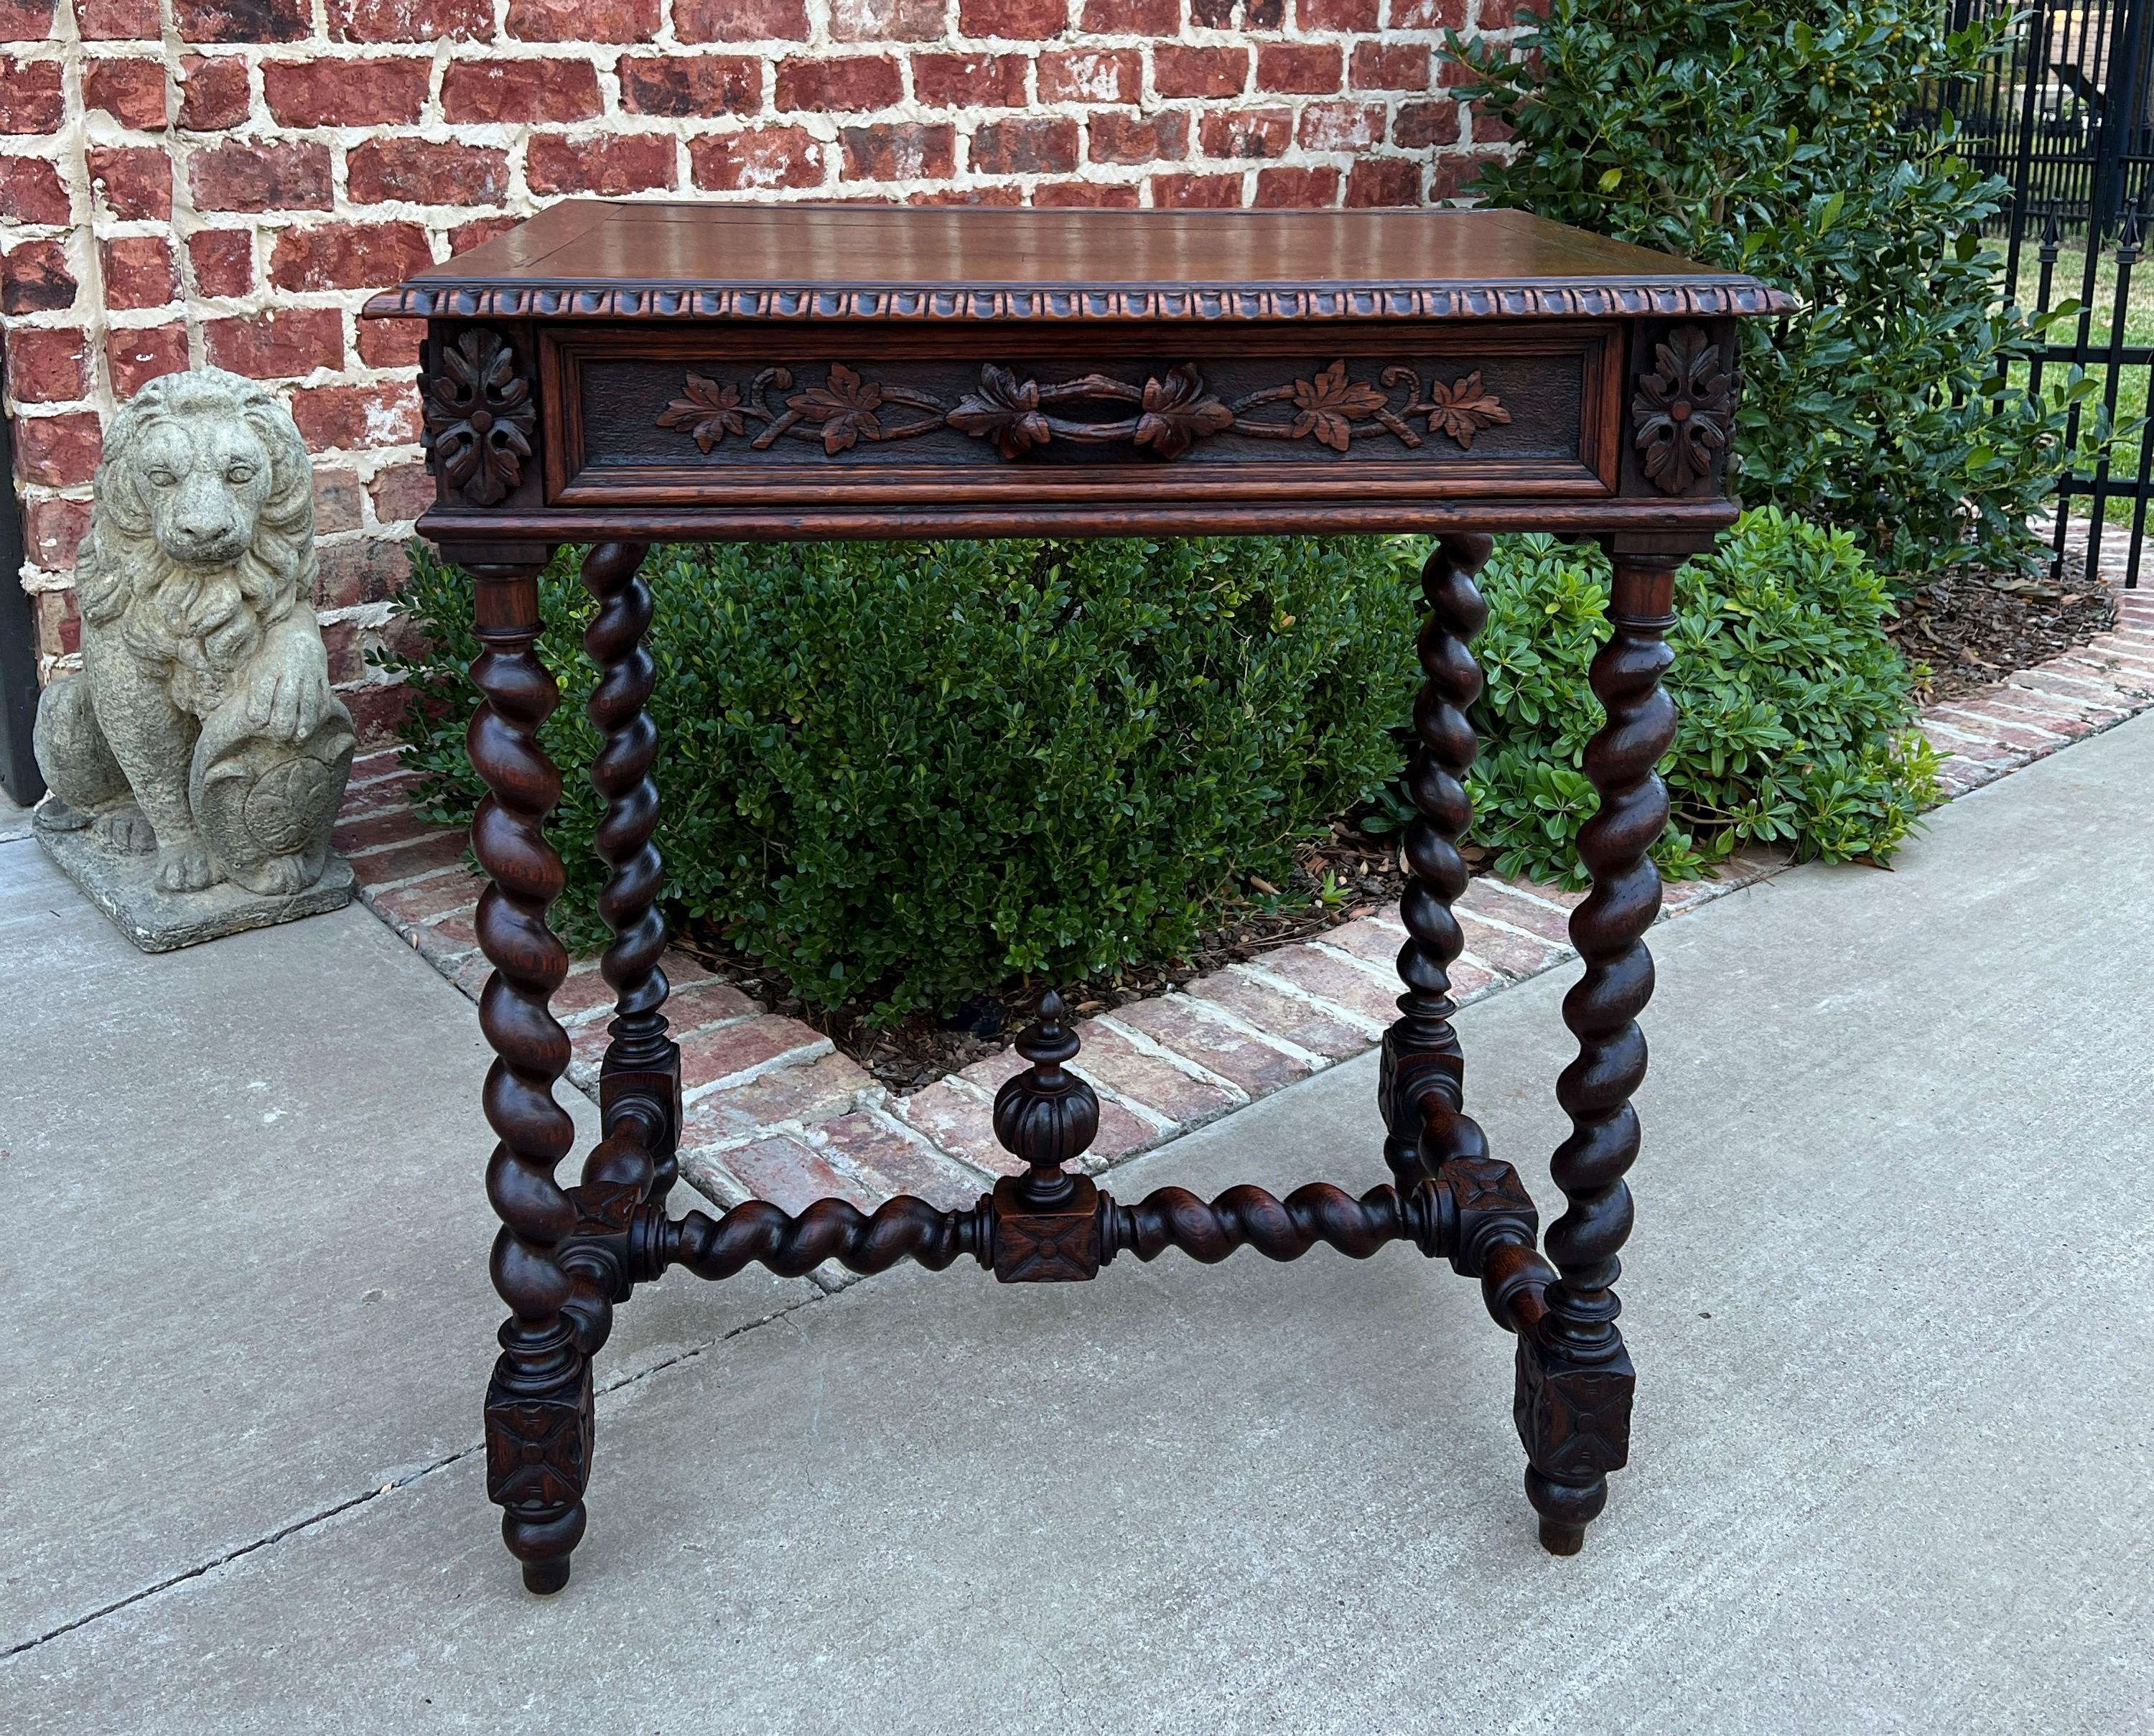 Beautiful 19th century antique petite French oak renaissance revival desk or table with drawer, barley twist legs, stretcher and up finial.
~~c. 1880s 

With so many people working from home now, DESKS have become our most often requested items